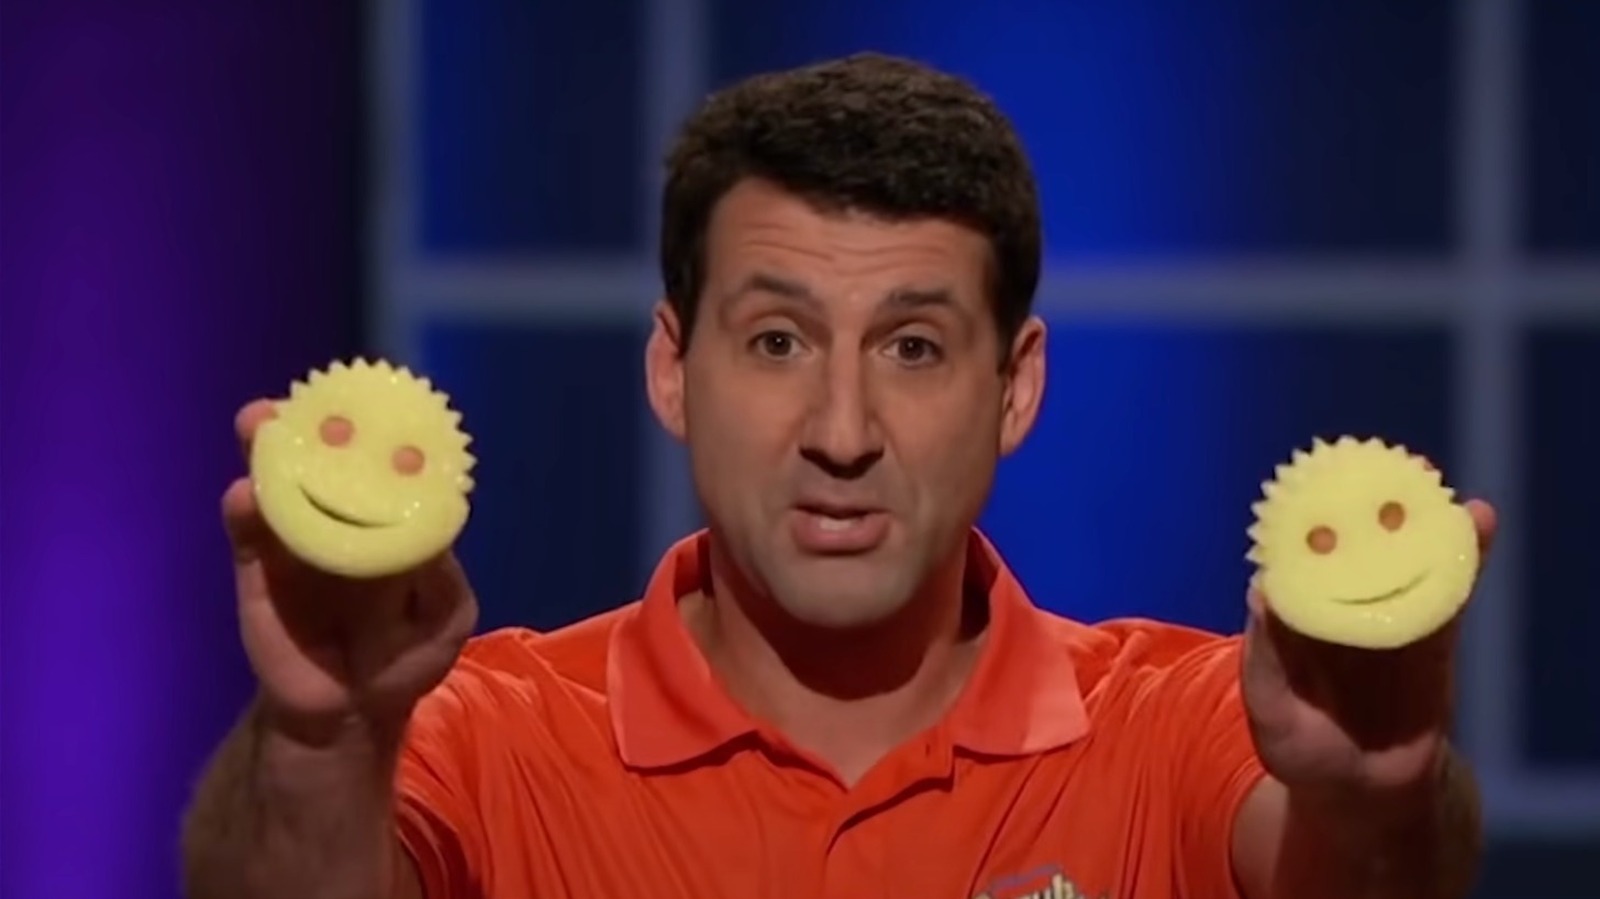 What Have Been The Most Successful Products From Shark Tank?